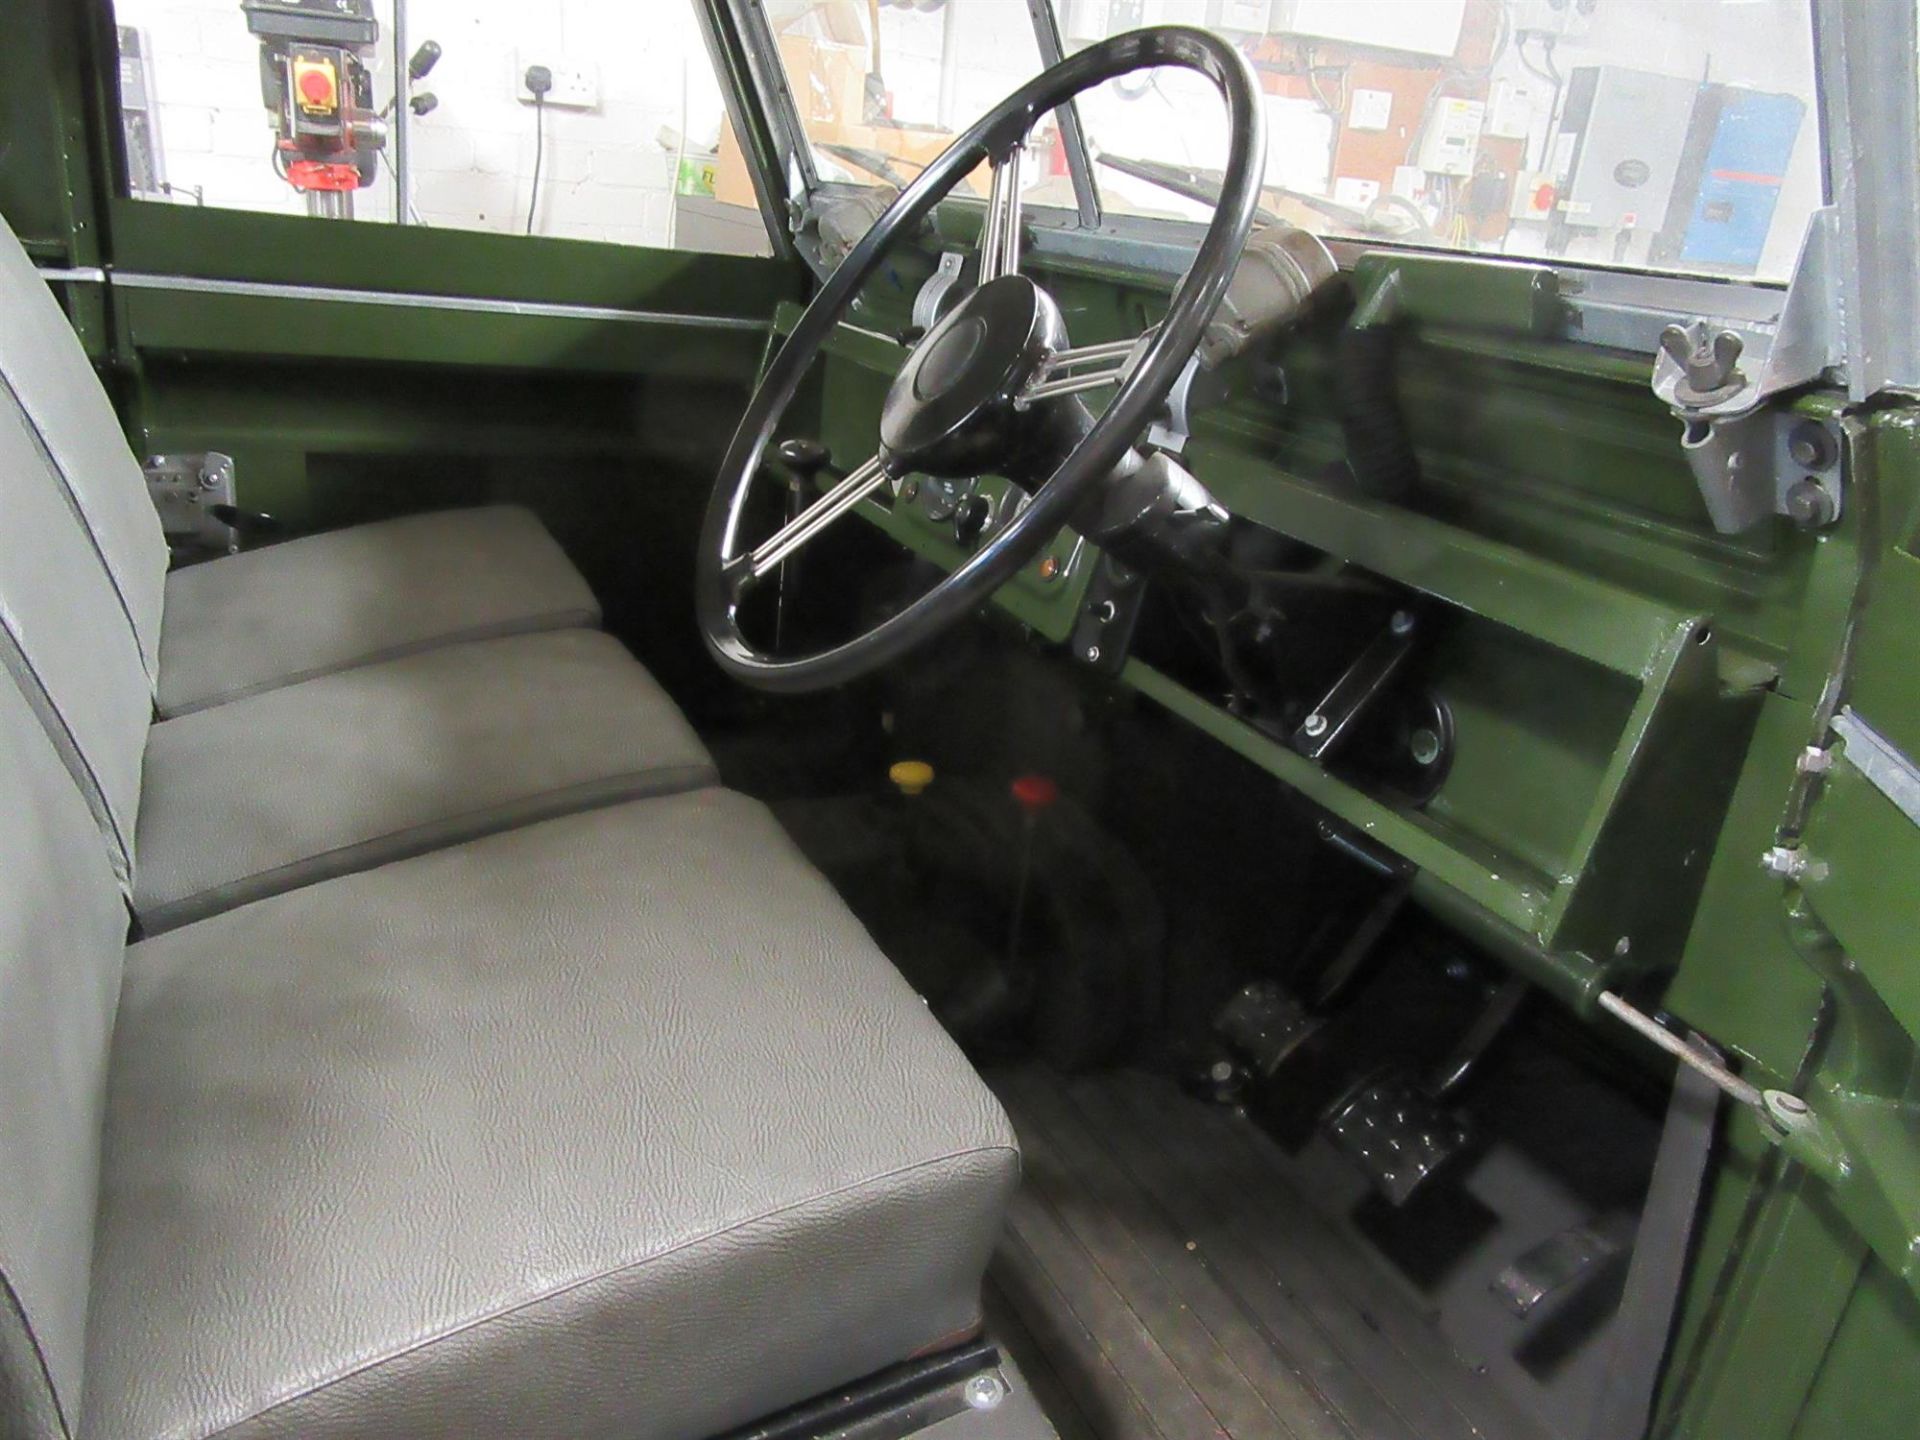 1963 Land Rover Series IIA 88" 'Olive' - Image 2 of 10